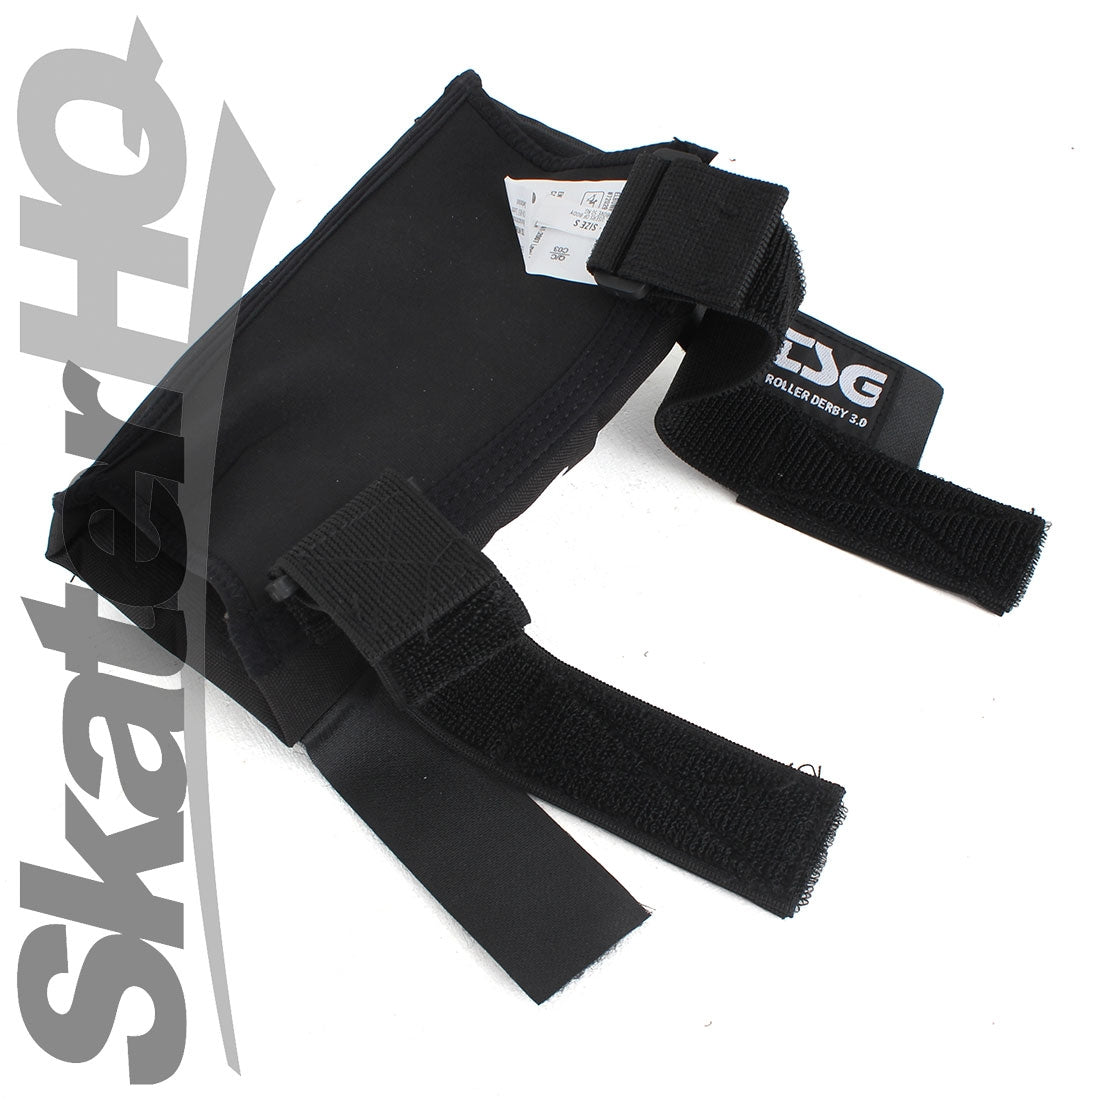 TSG Rollerderby Elbow 3.0 - Large Protective Gear